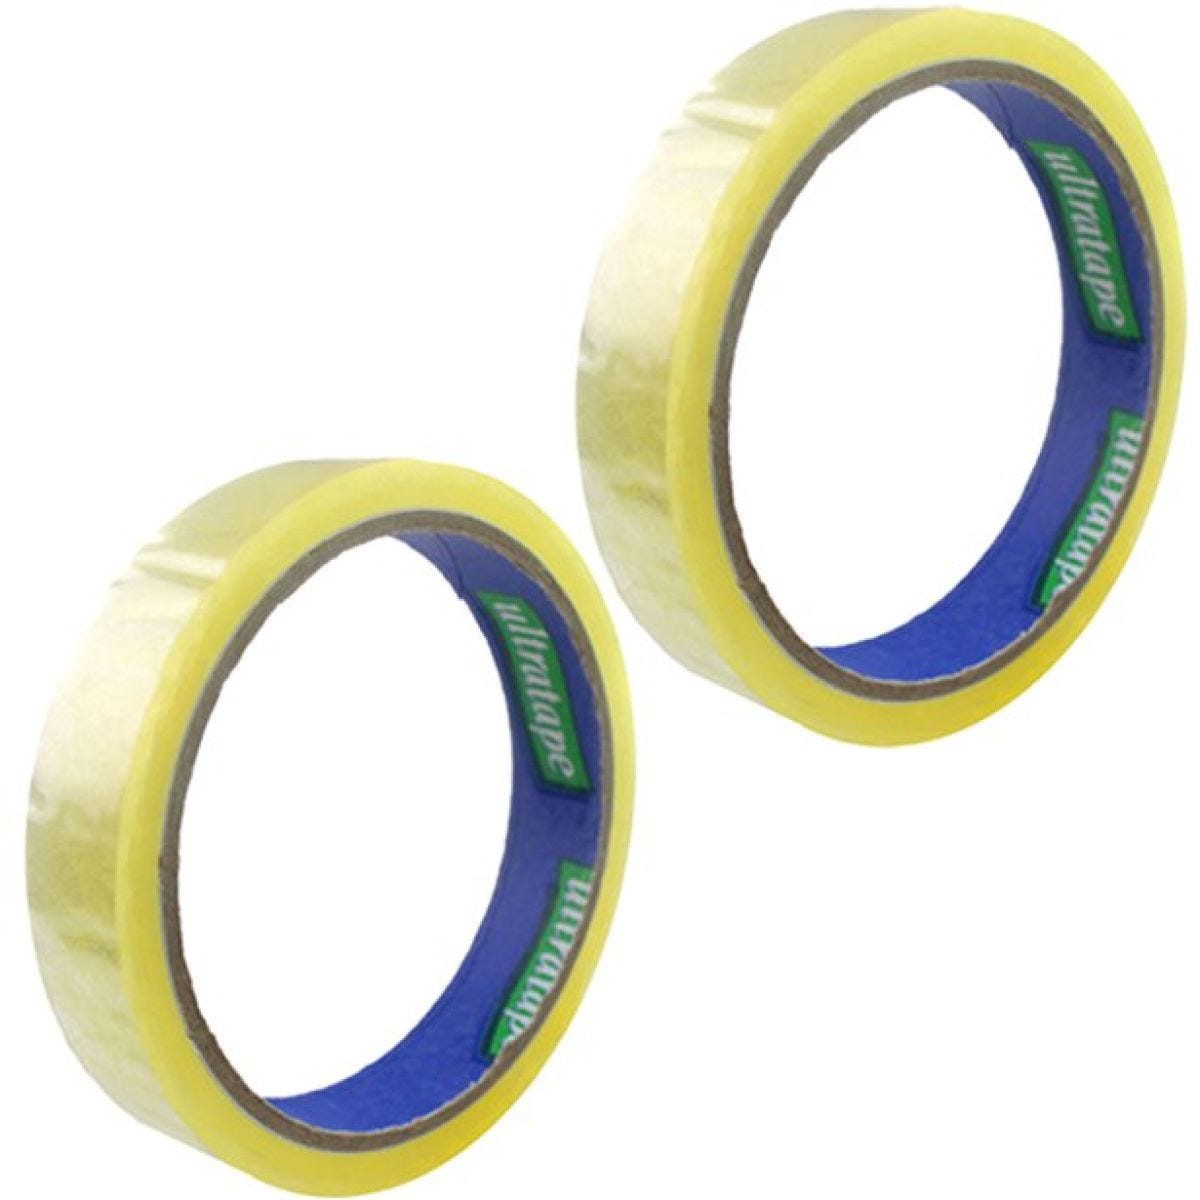 Clear Sticky Tape Roll - 40m